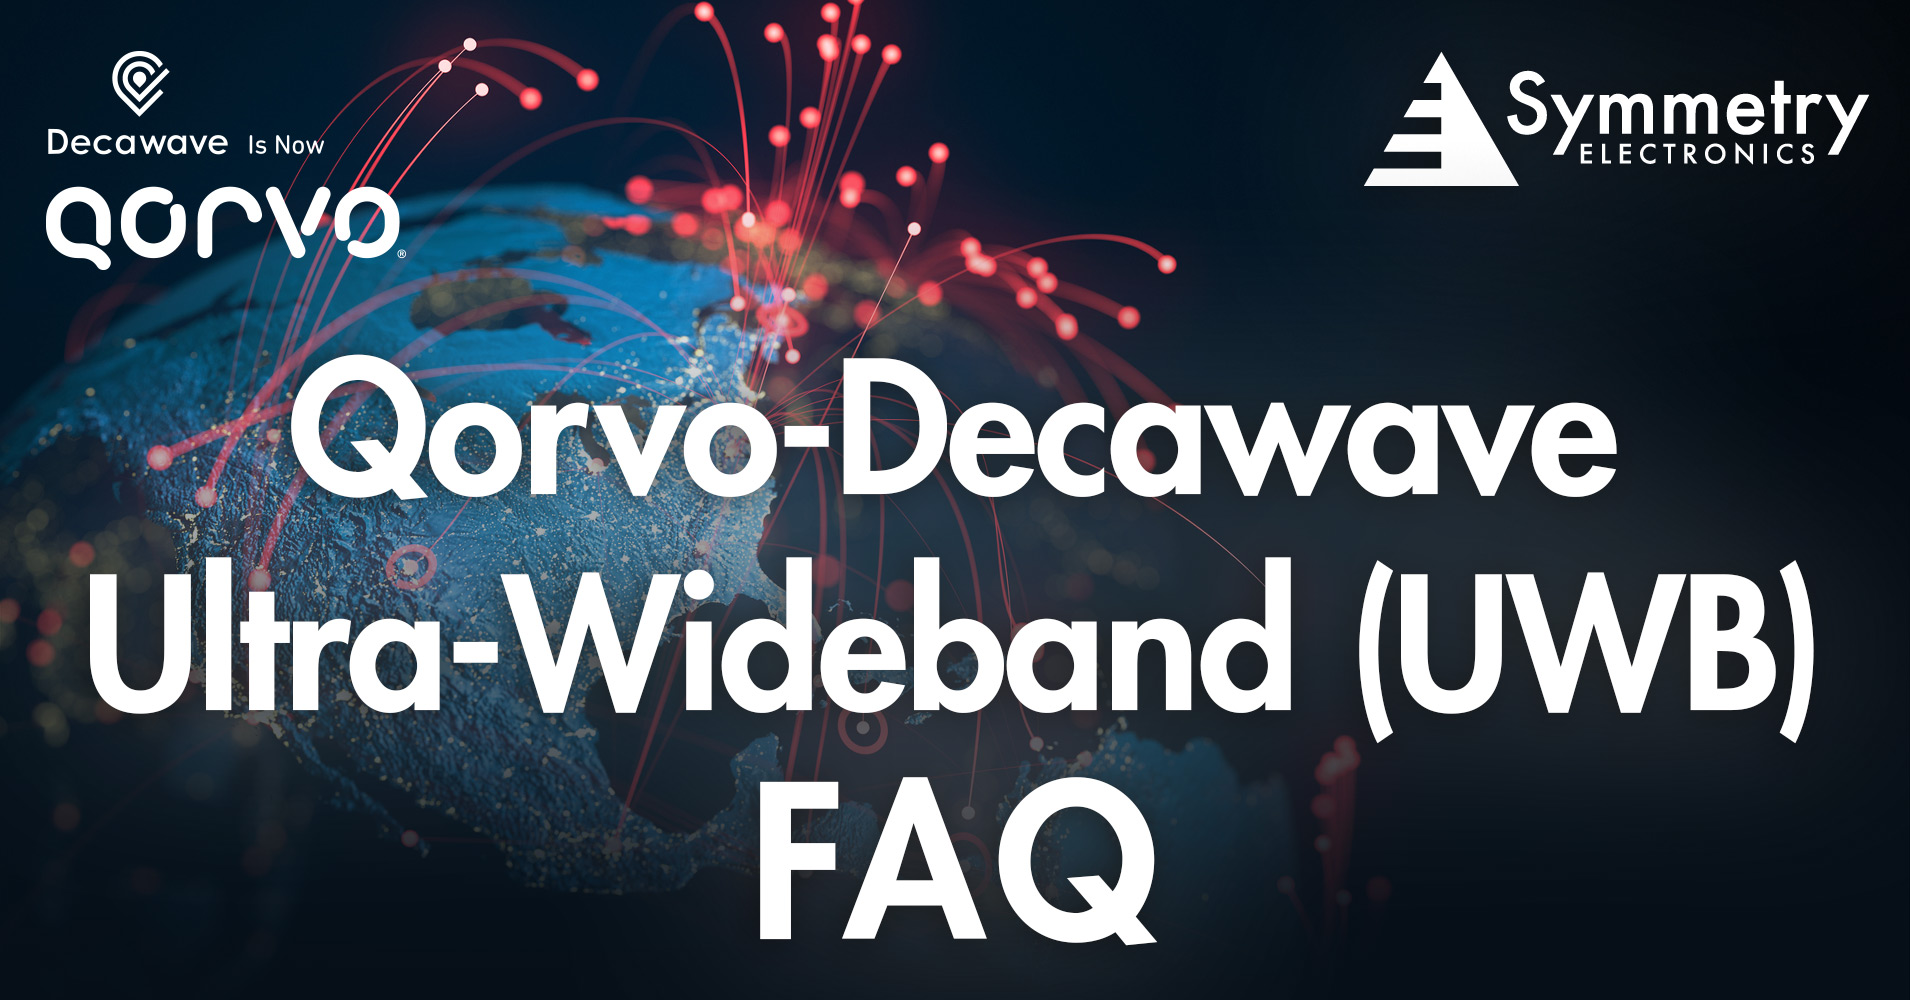 Symmetry-Electronics-Answers-Frequently-Asked-Questions-On-Qorvo-Decawave's-Ultra-Wideband-UWB